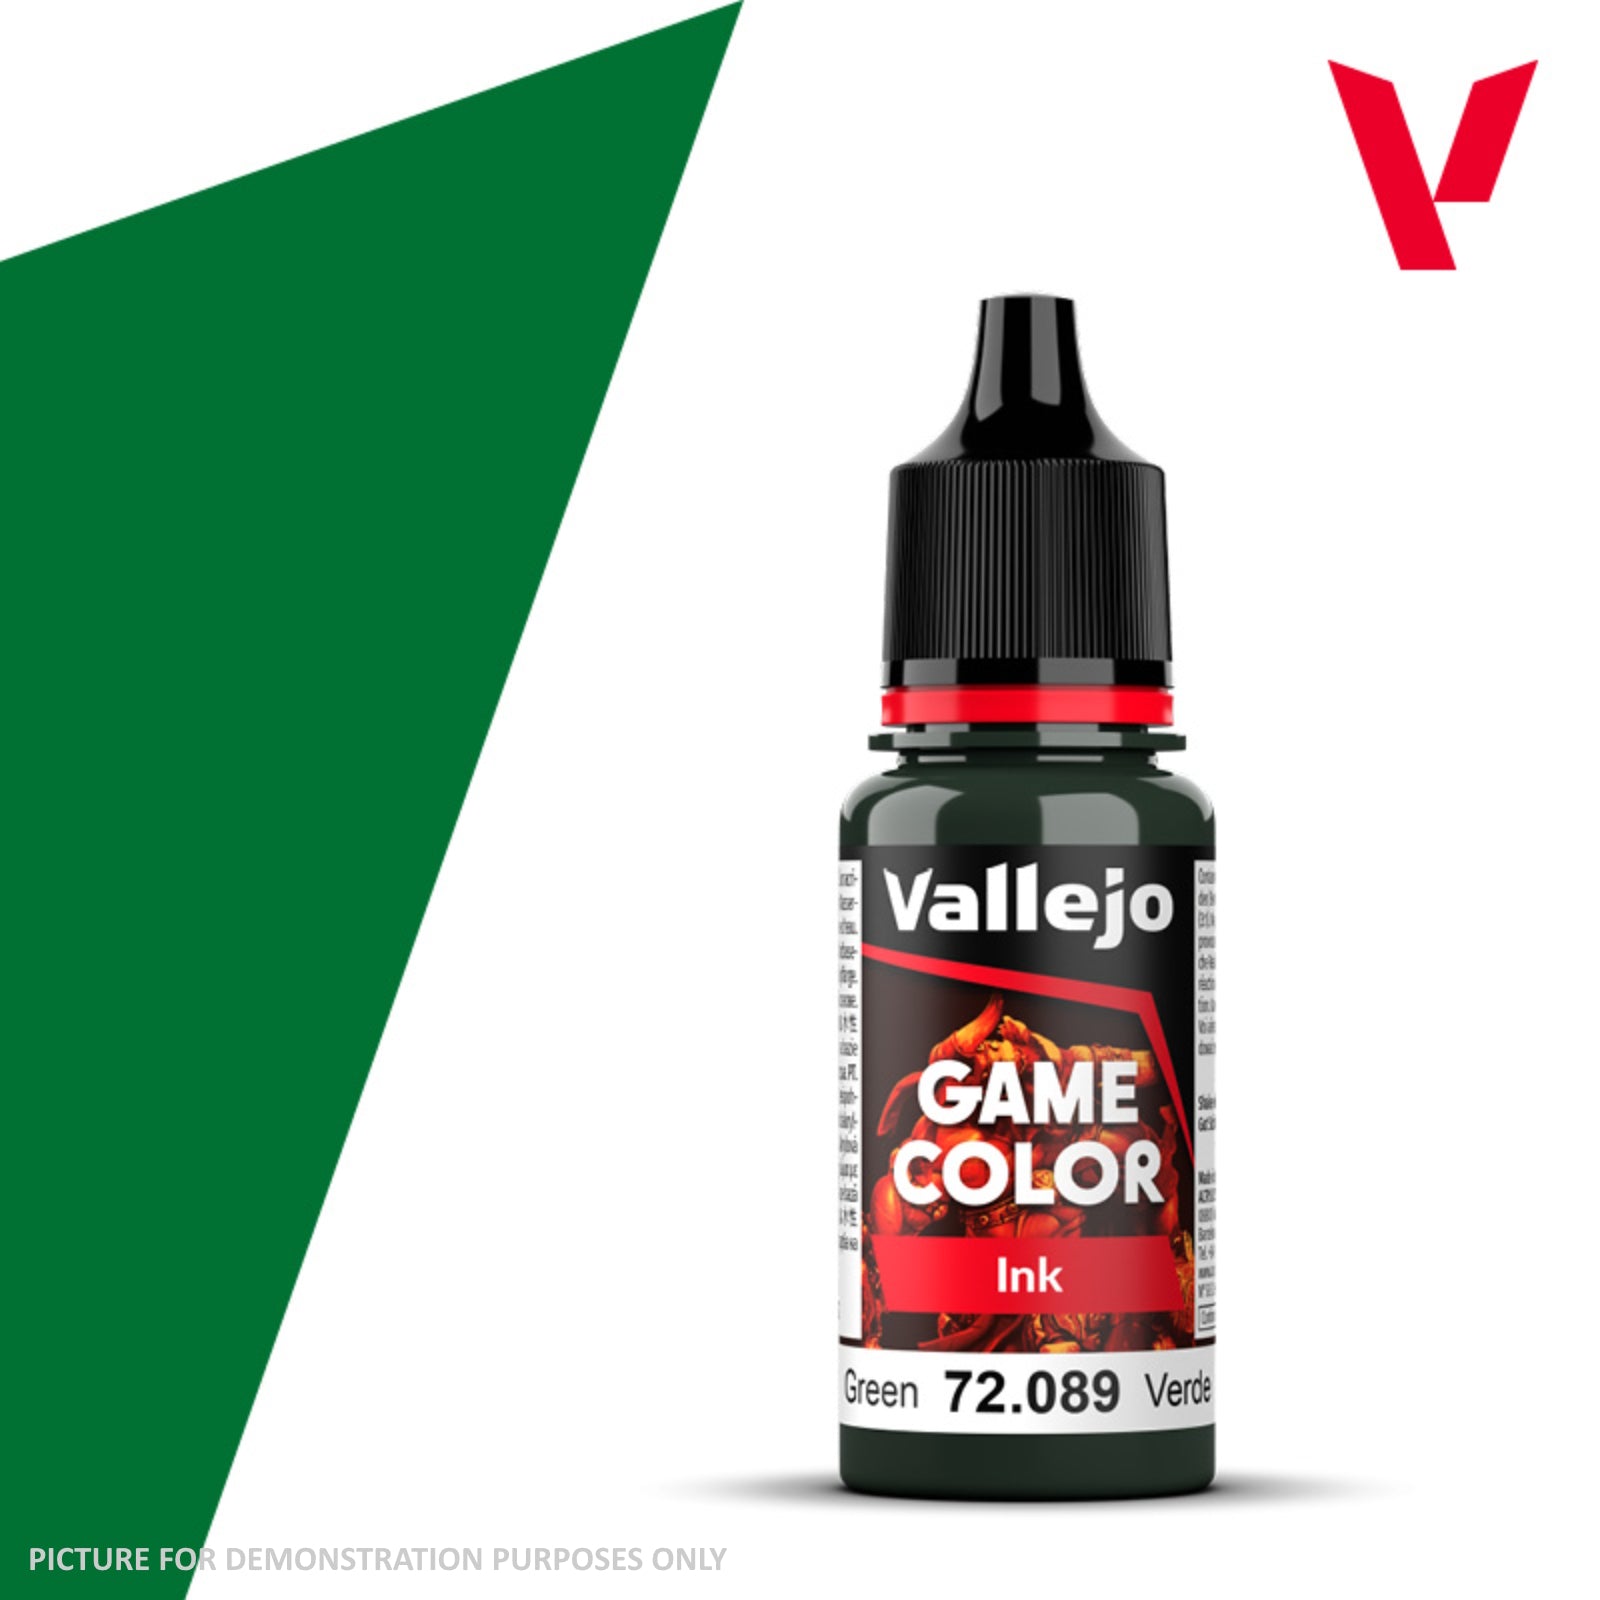 Vallejo Game Colour Ink - 72.089 Green 18ml